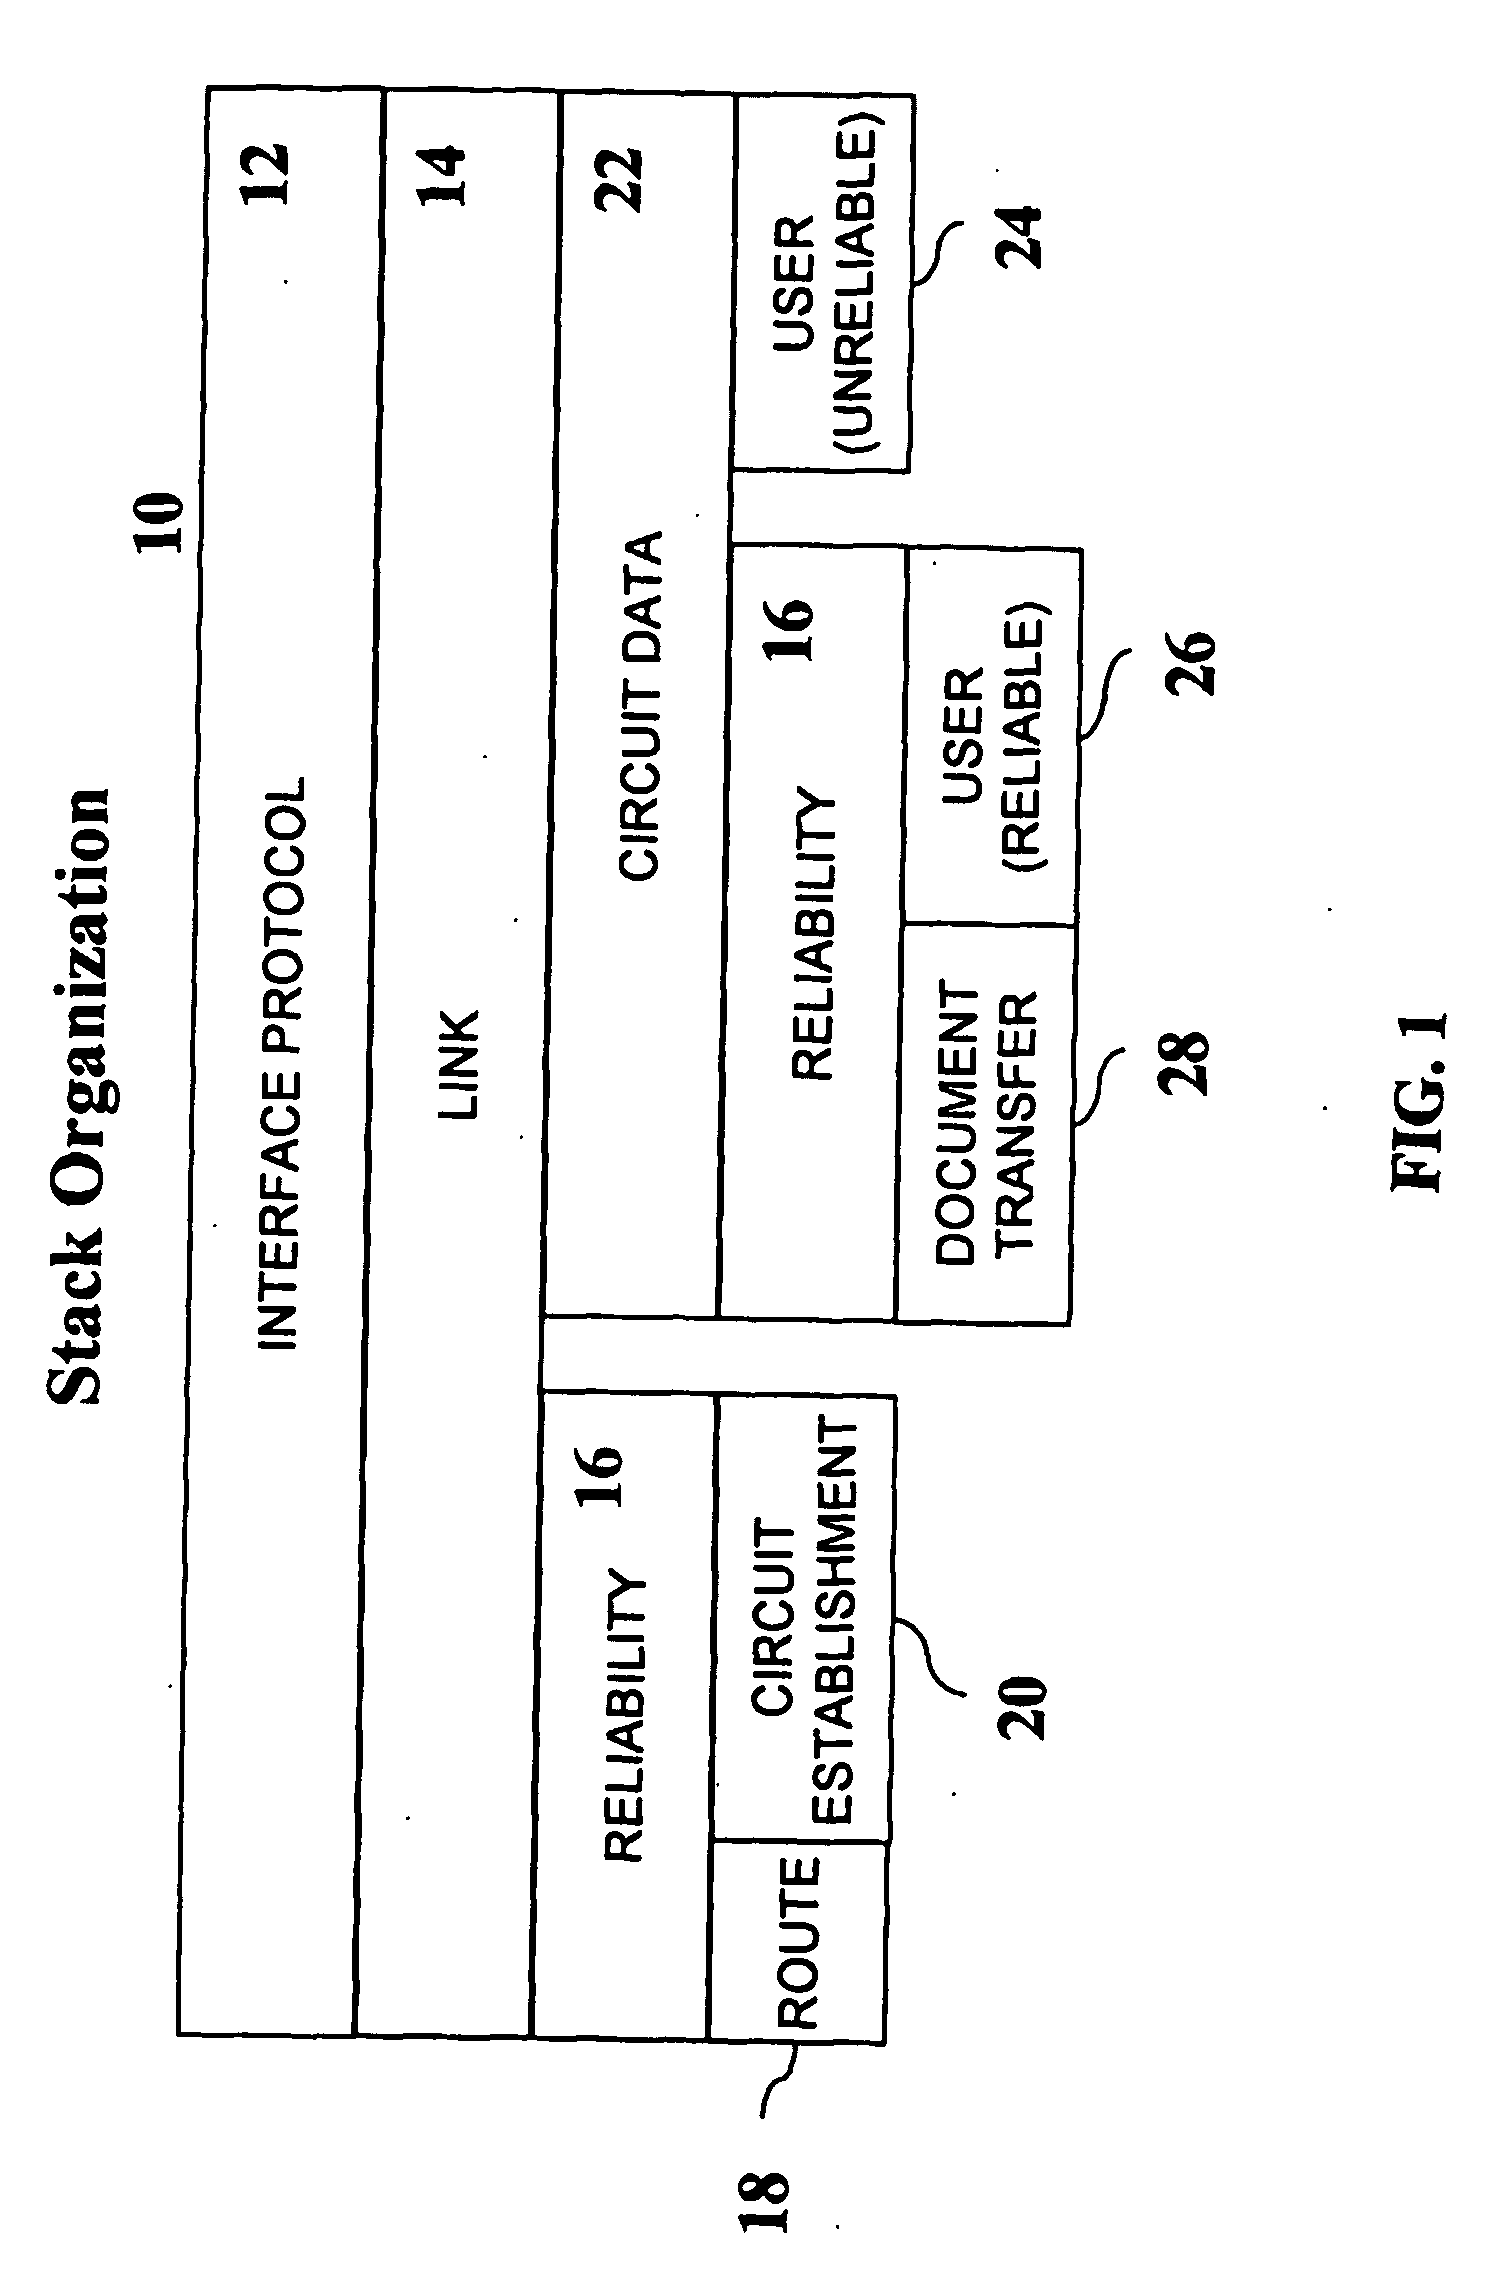 Method and apparatus for secure communications and resource sharing between anonymous non-trusting parties with no central administration